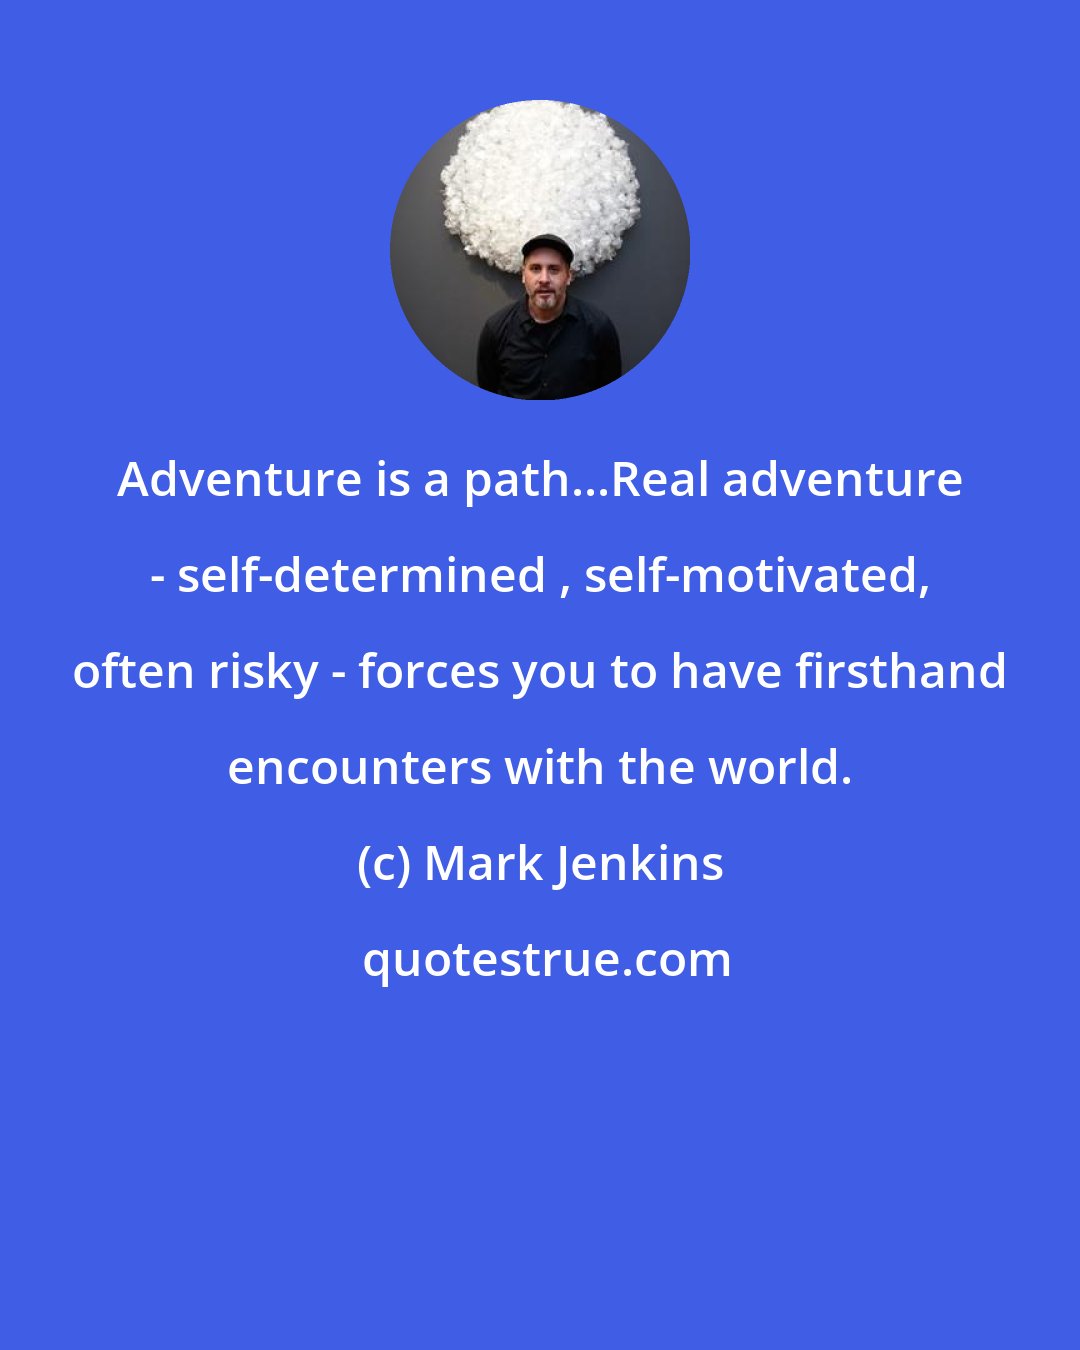 Mark Jenkins: Adventure is a path...Real adventure - self-determined , self-motivated, often risky - forces you to have firsthand encounters with the world.